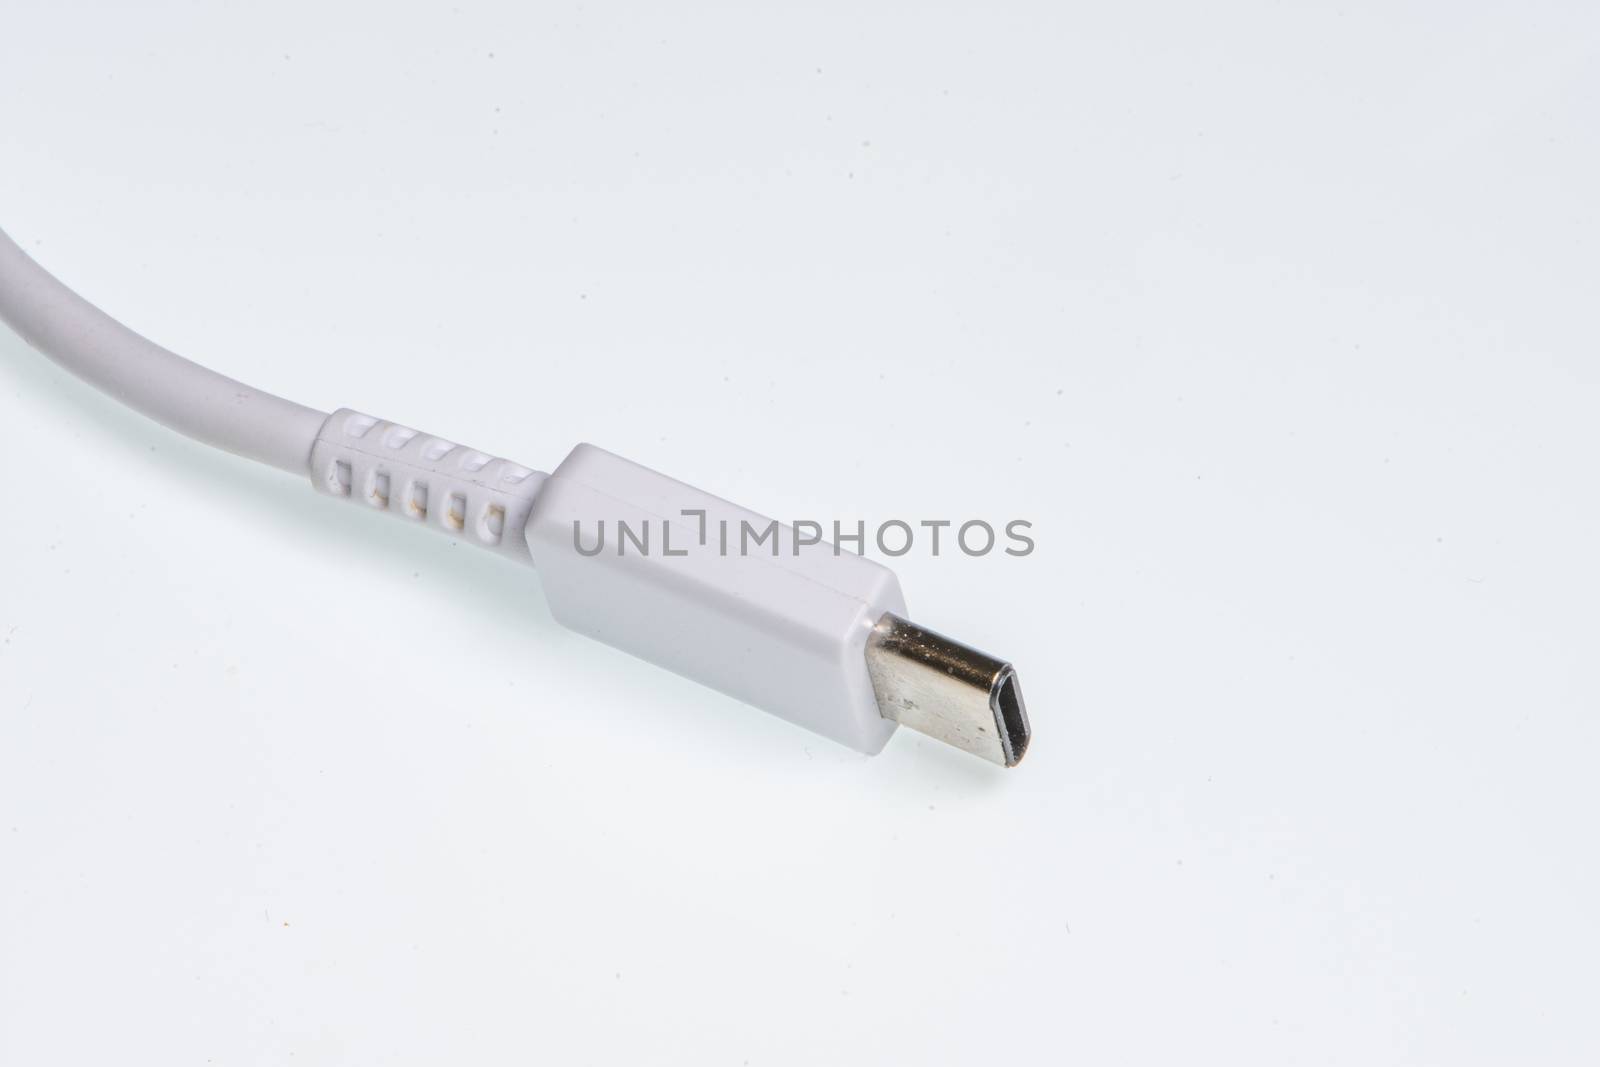 detail of a white usb-c connector on a white background